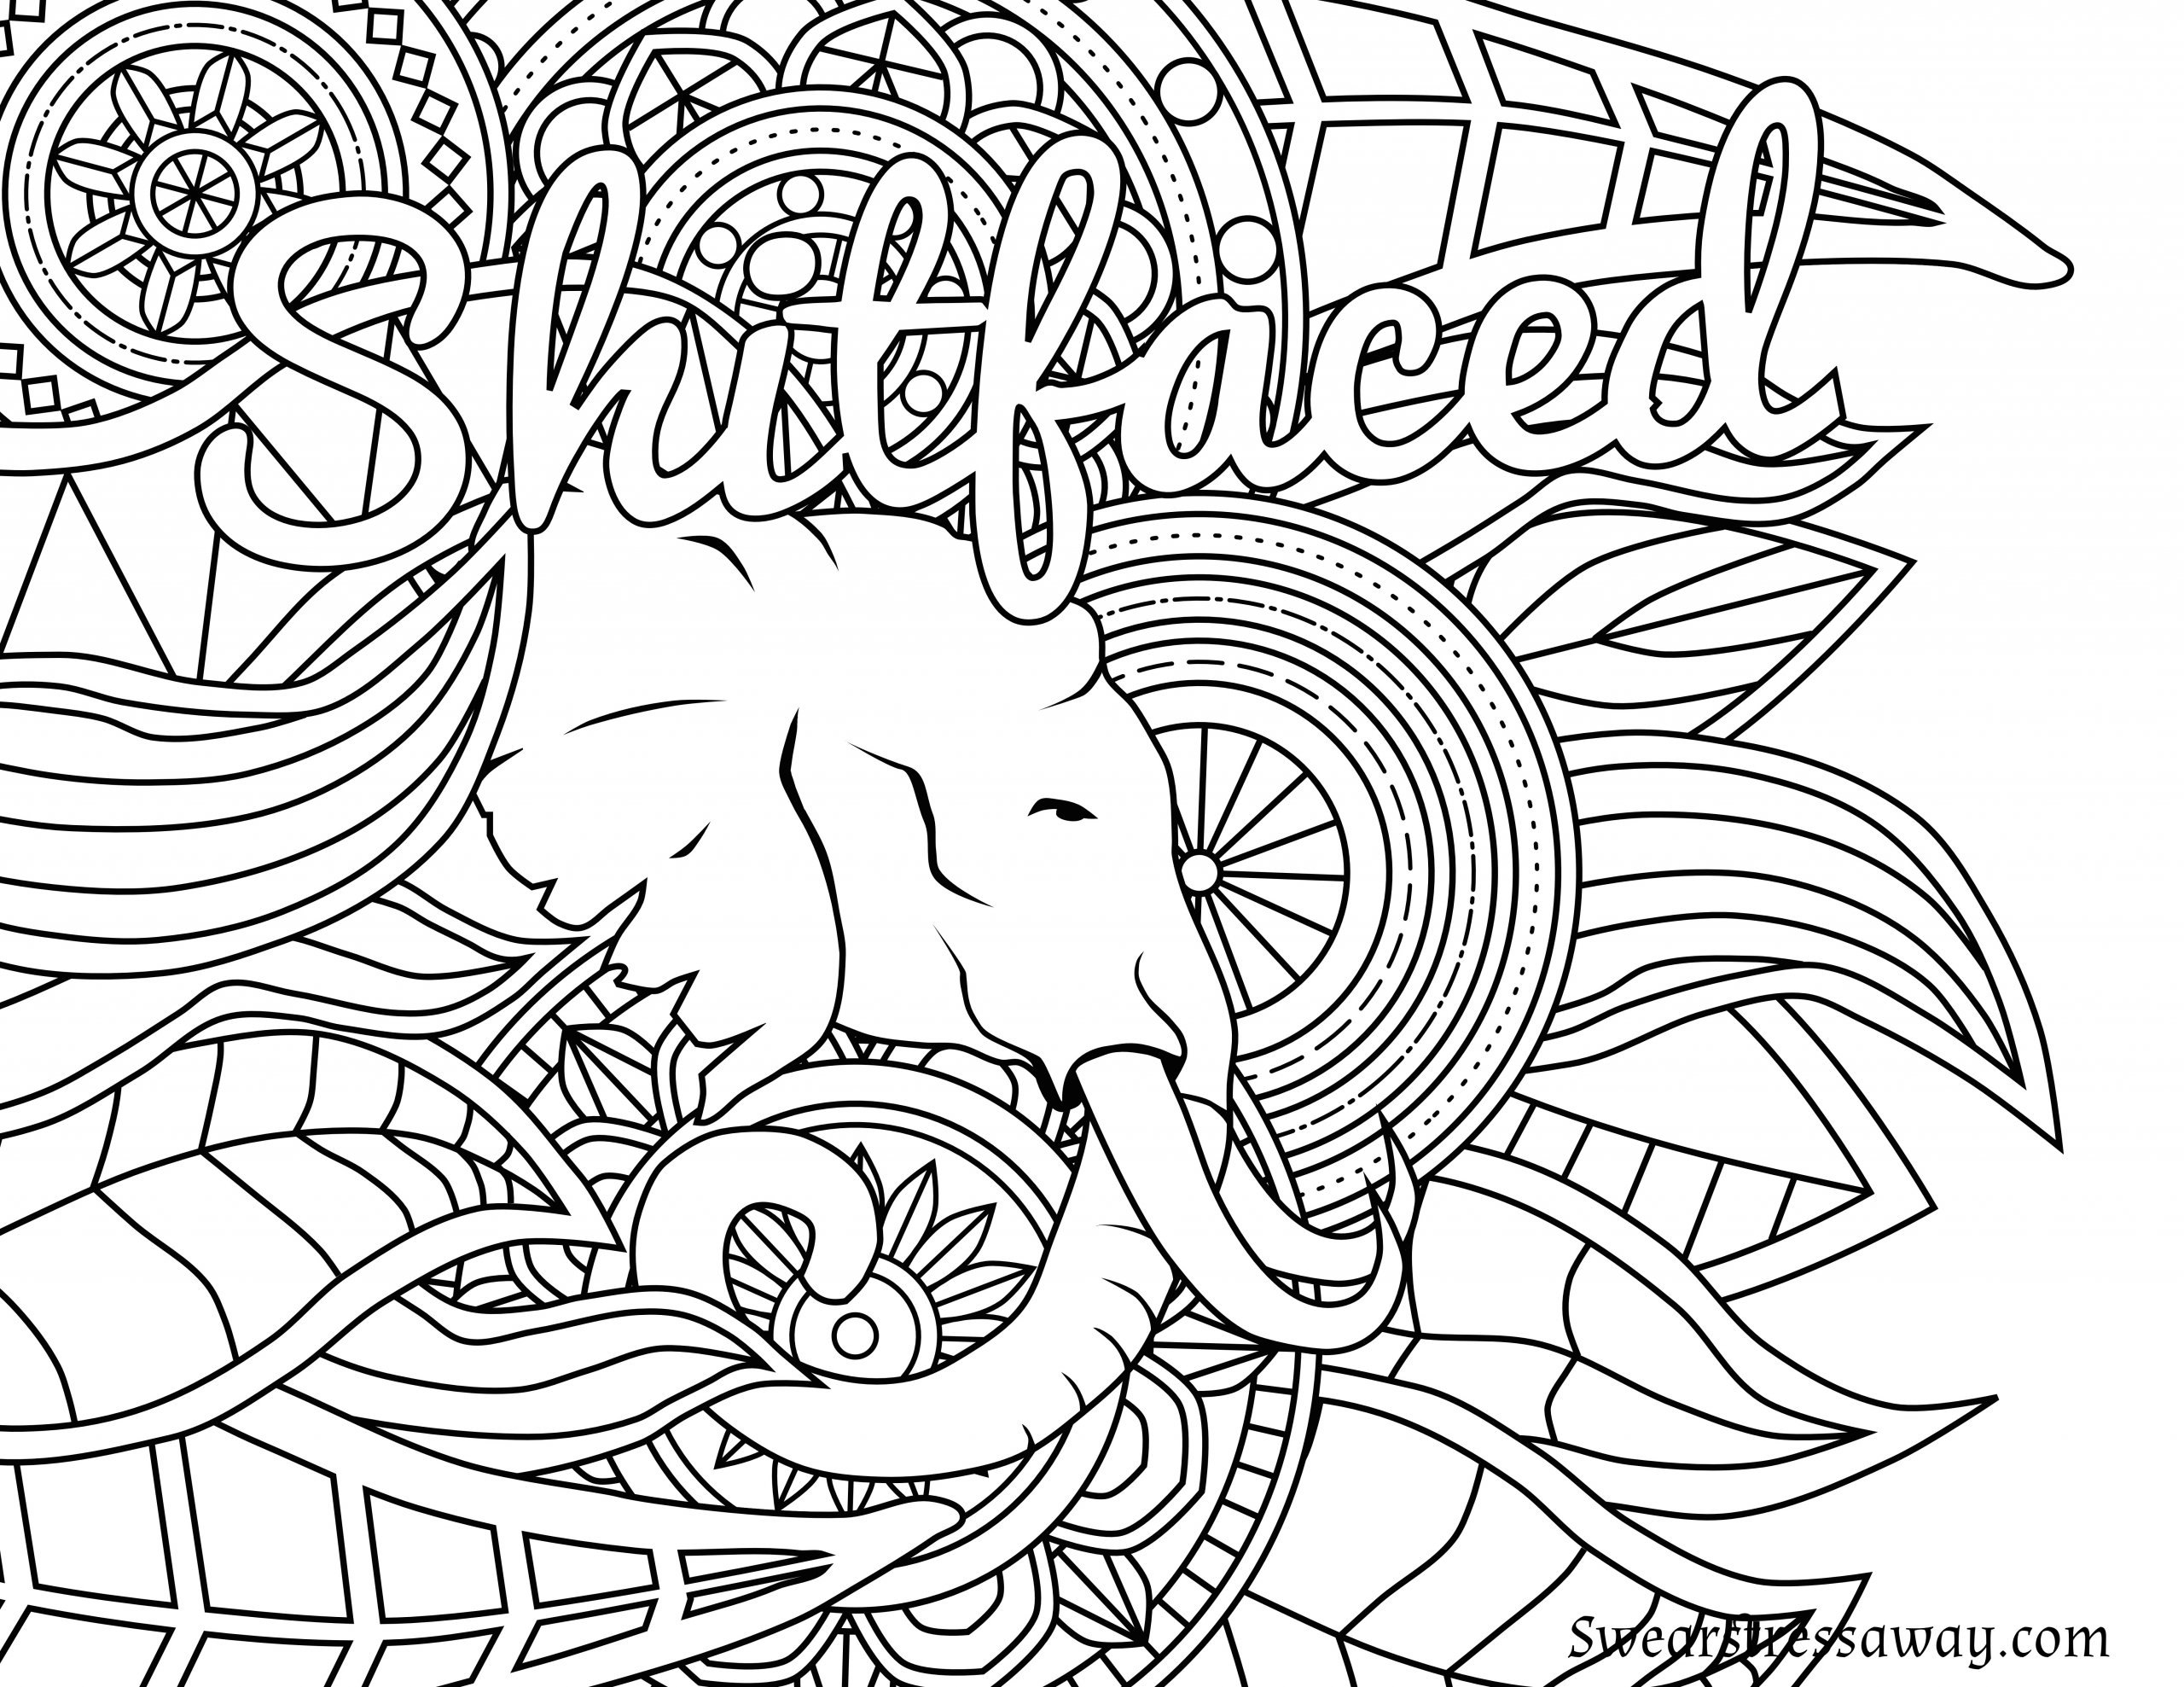 Adult Cursing Coloring Book
 Pin on Swear Word Coloring Pages